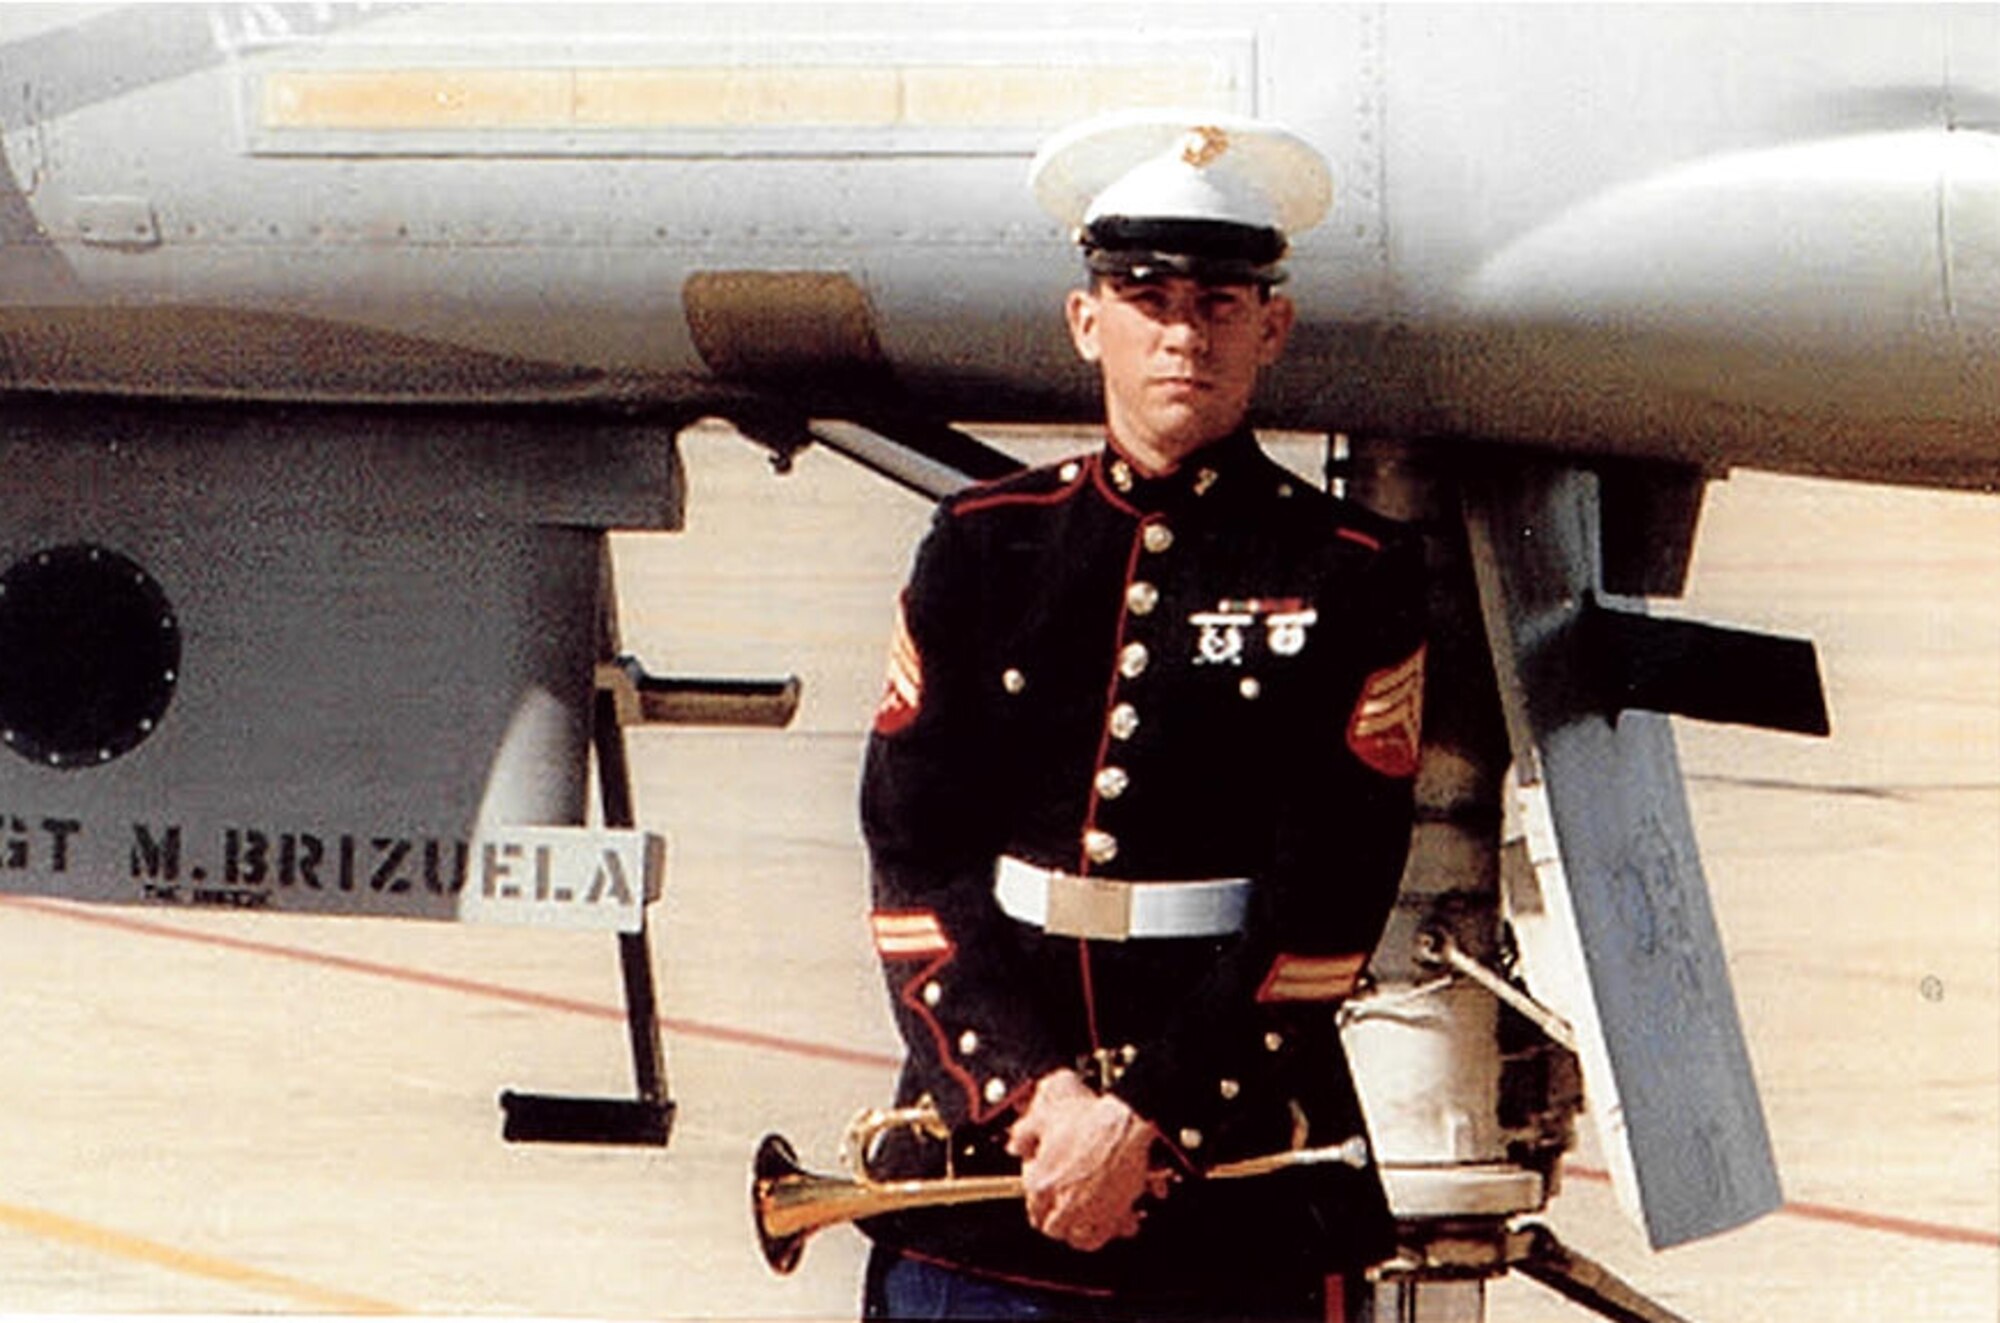 U.S. Marine Corp Sgt. Michael Brizuela takes a photo with his bugle and his F-4 Phantom at Naval Air Station Dallas in 1988. For 30 years he has volunteered with Marine and Air Guard Honor Guards. (Courtesy photo)